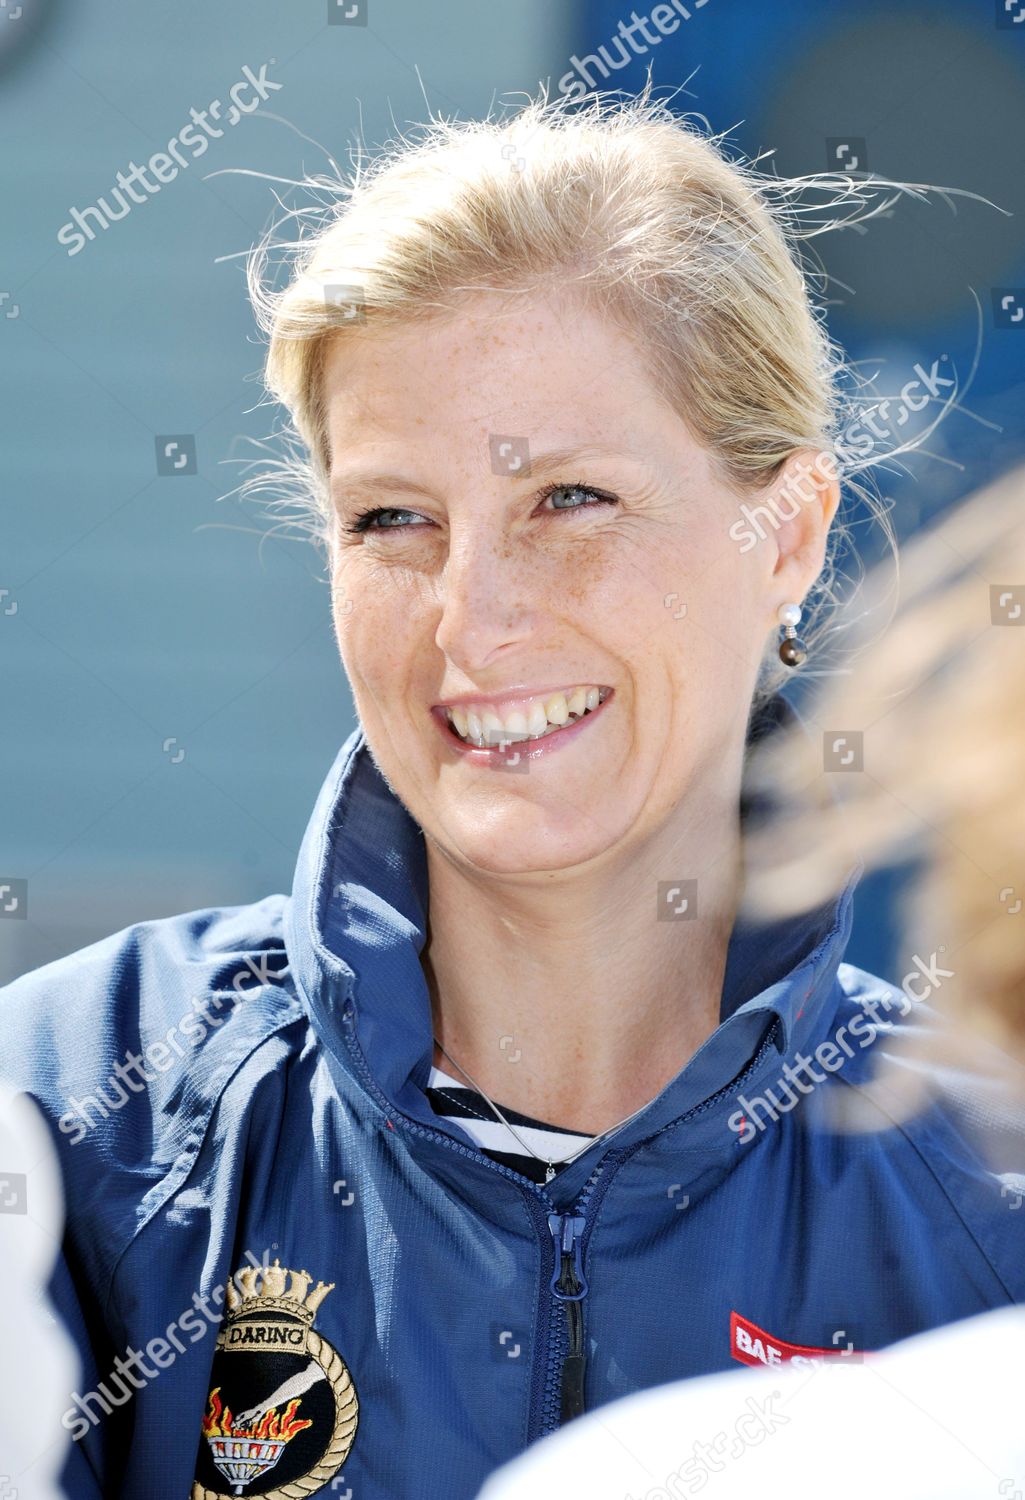 sophie-countess-of-wessex-official-visit-to-the-sail-training-organisation-at-portland-dorset-britain-shutterstock-editorial-1741019n.jpg